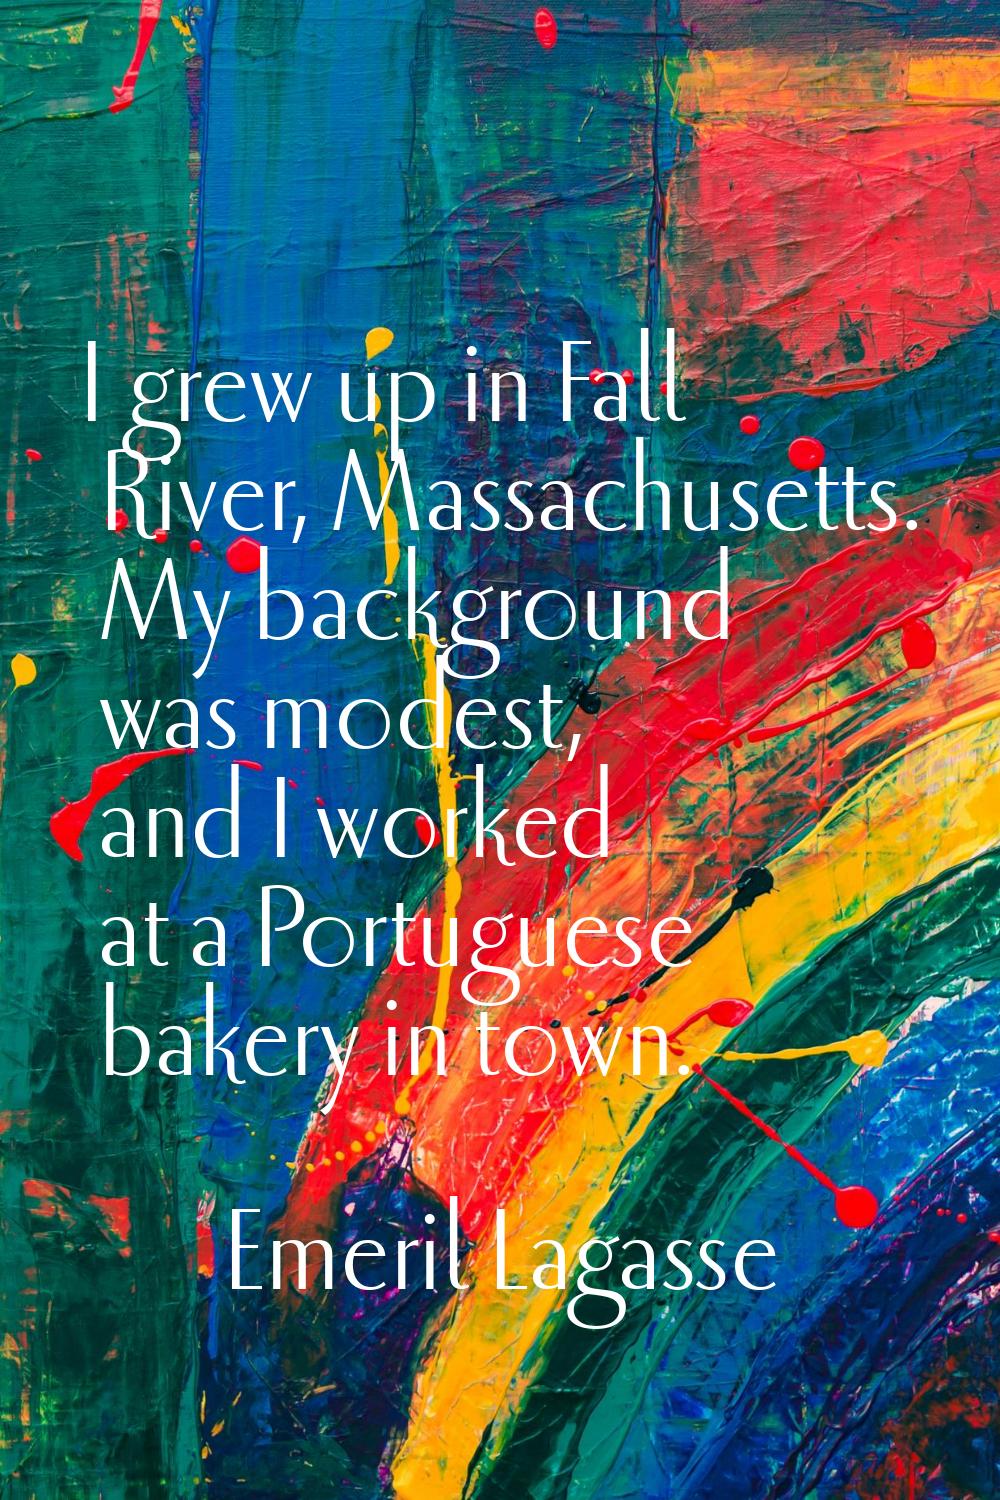 I grew up in Fall River, Massachusetts. My background was modest, and I worked at a Portuguese bake